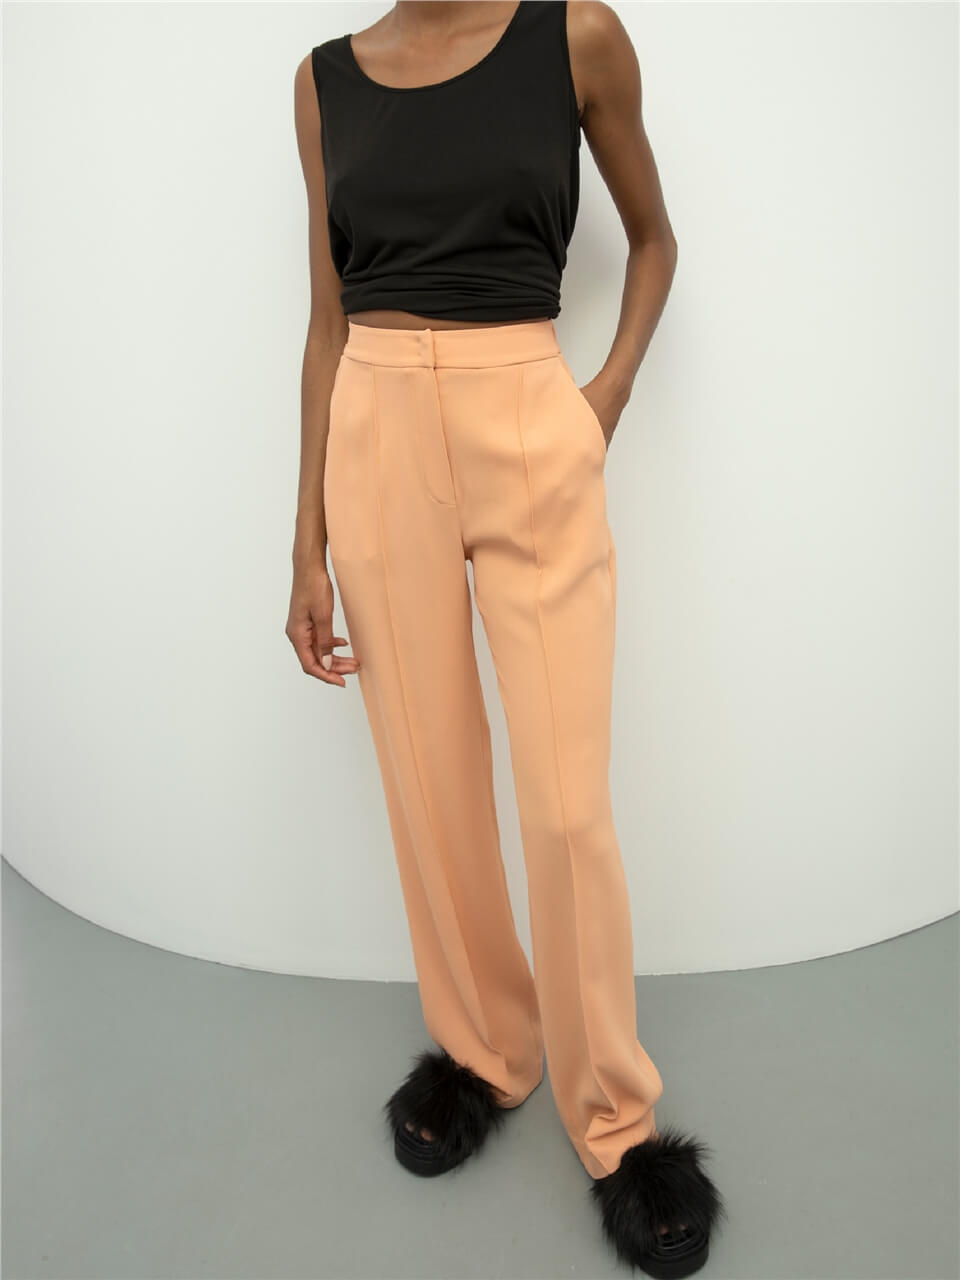 Peach Color Trousers